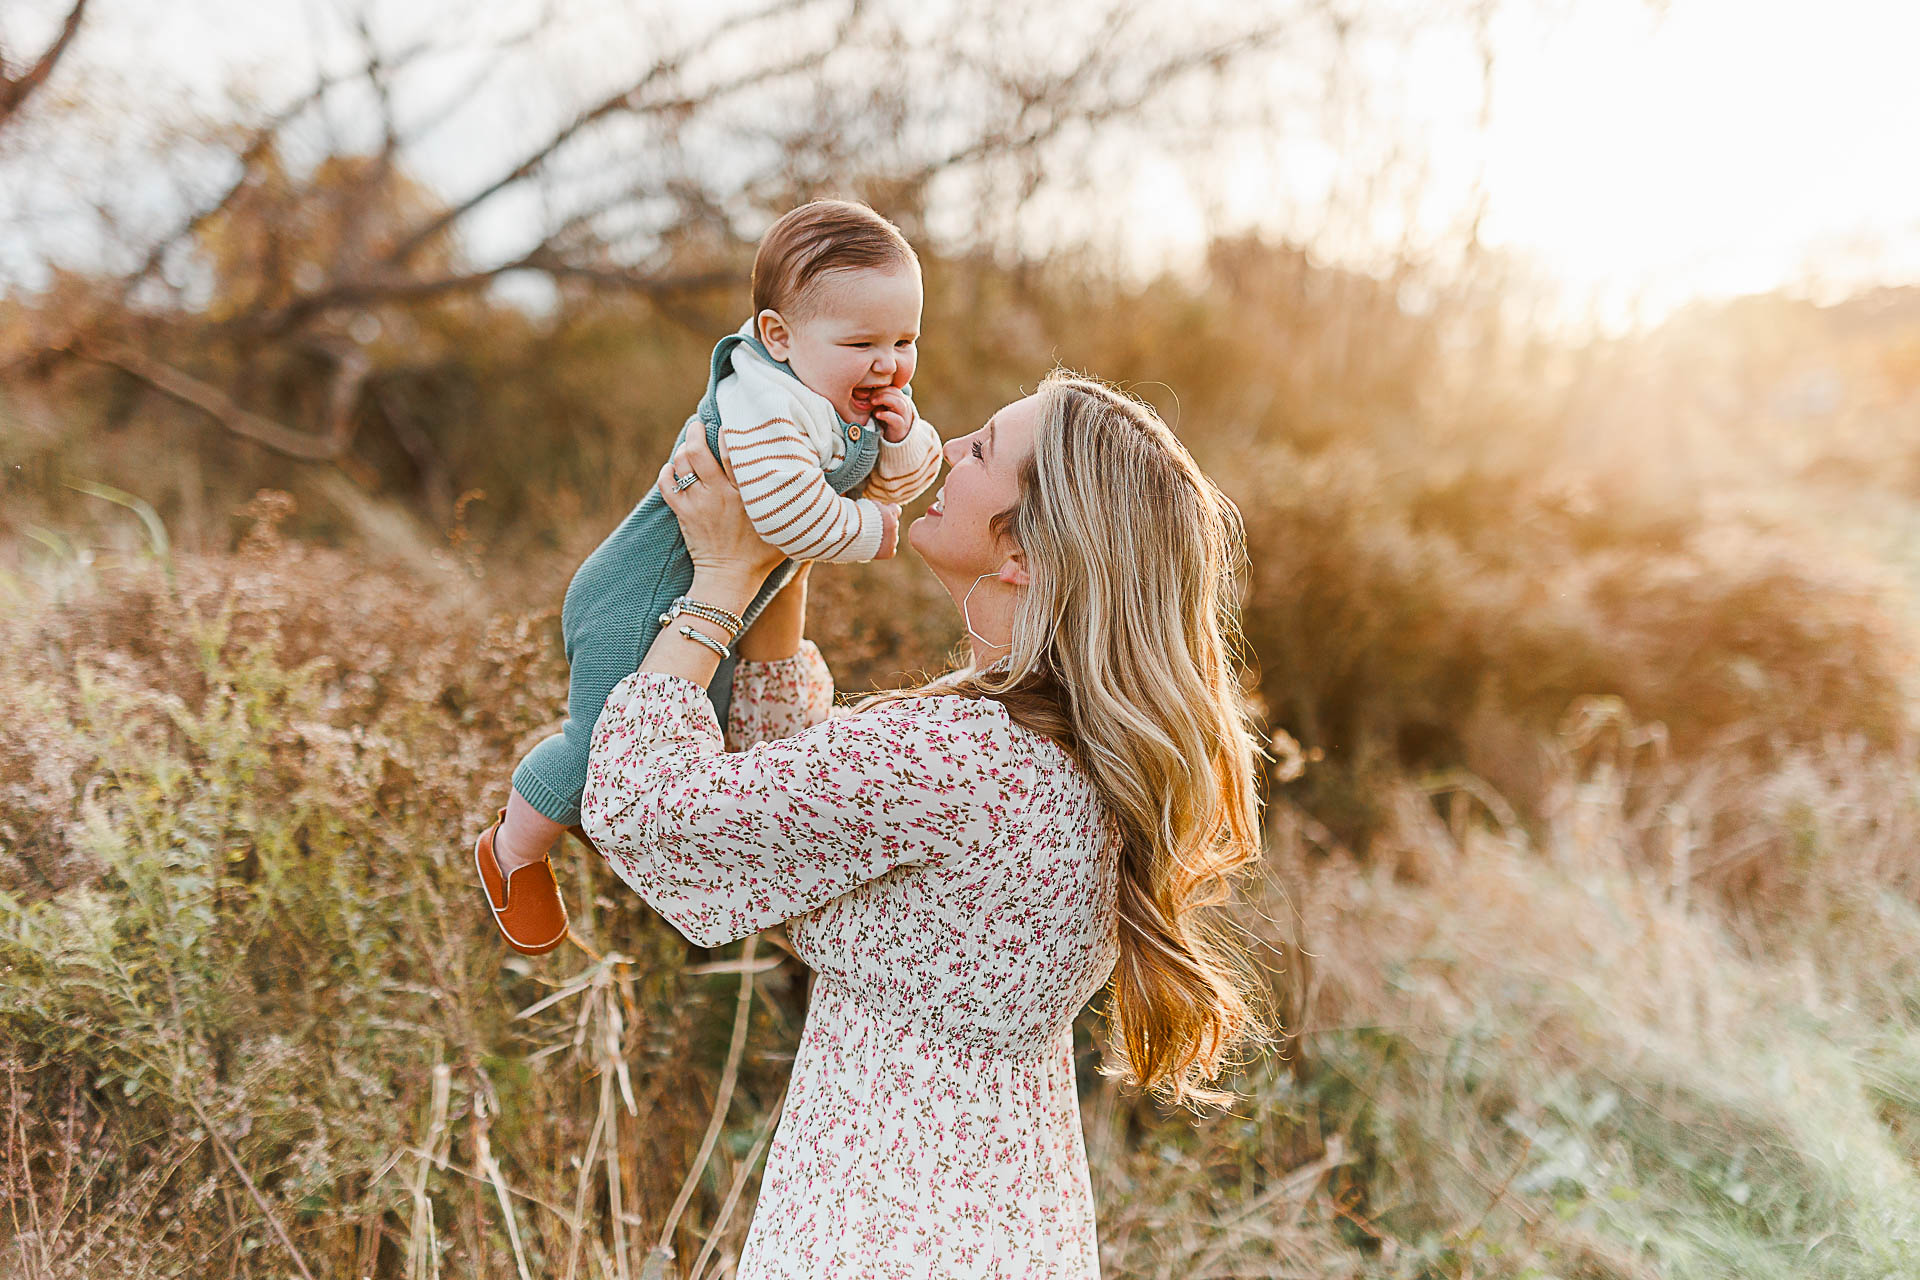 Photo by Hingham Family Photographer Christina Runnals | Mom and baby in field in autumn